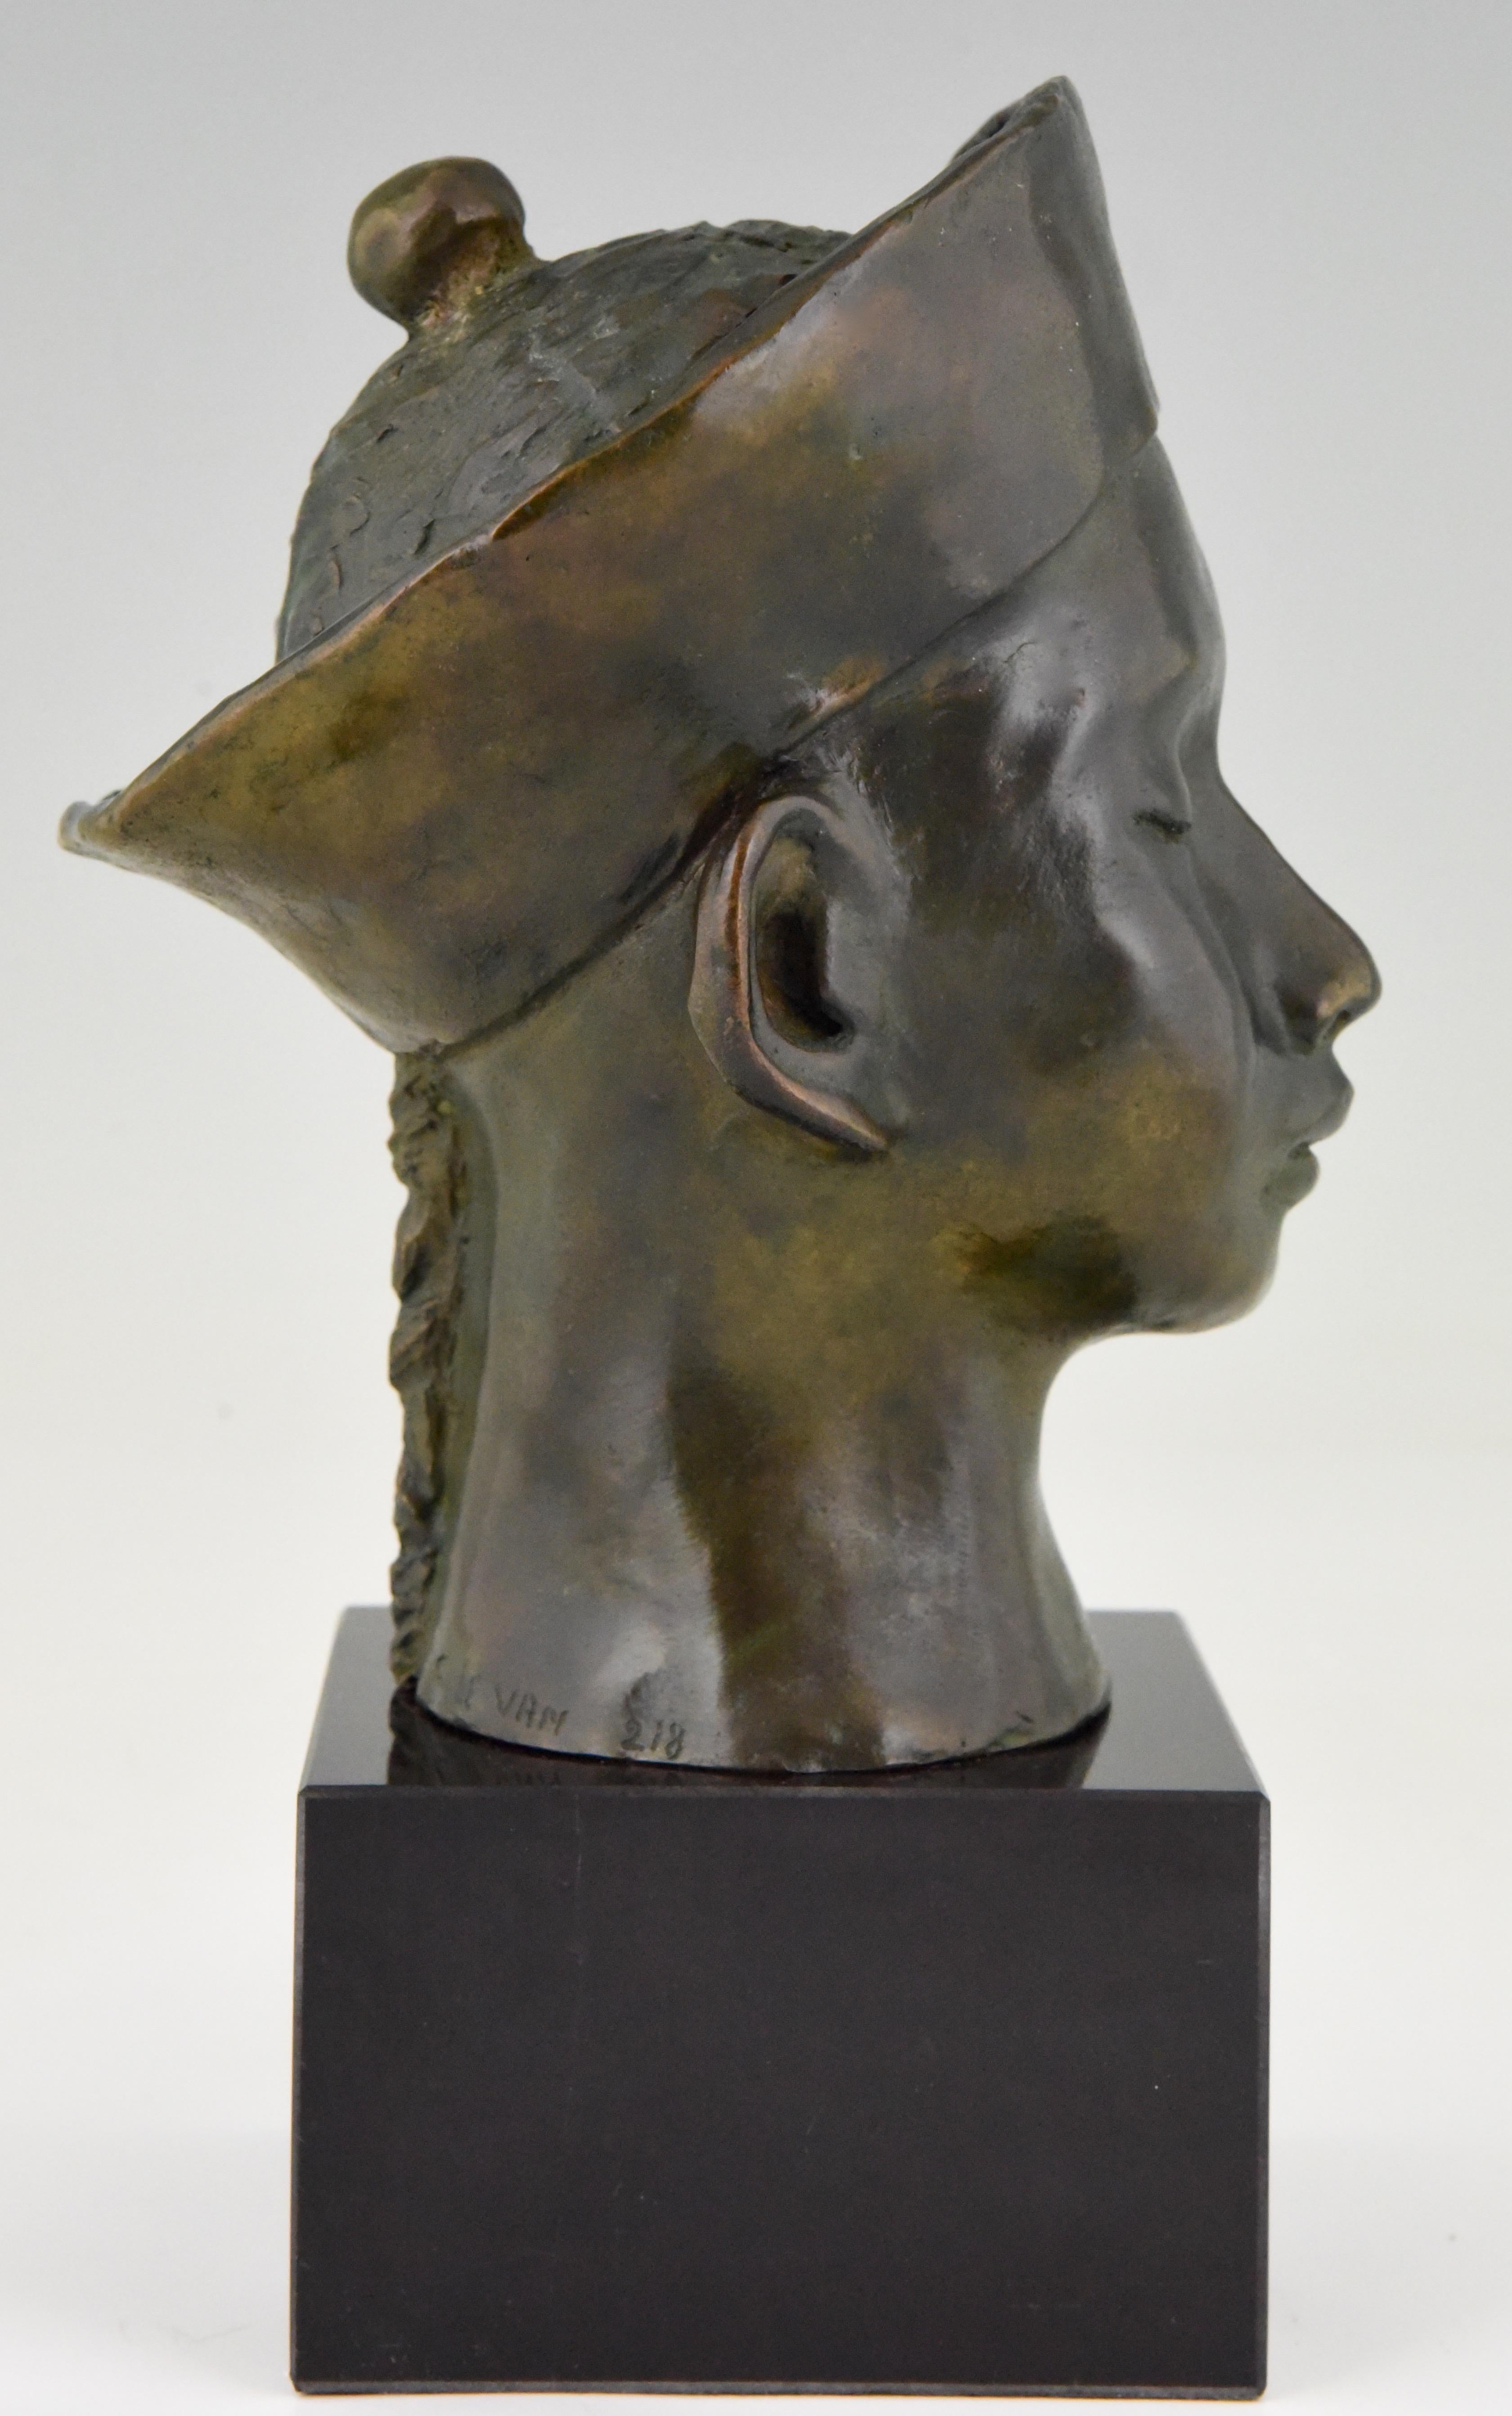 20th Century Art Deco Bronze Bust Chinese Boy with Hat and Braid. C. Le Van  1930